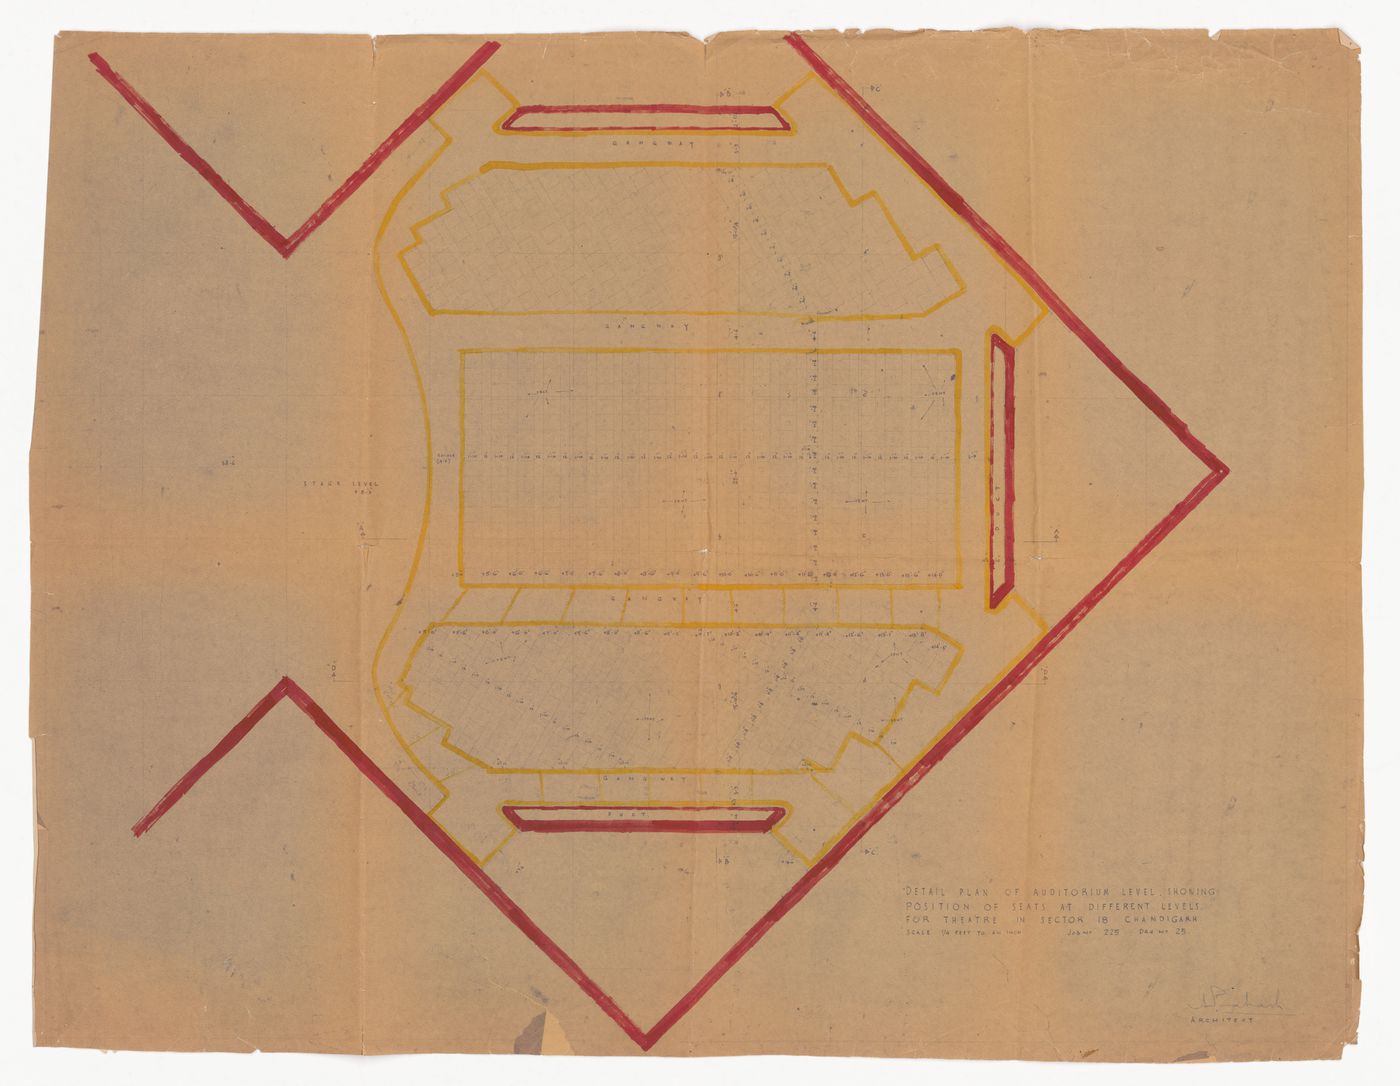 Detail of plan of auditorium level for Tagore Theatre, Chandigarh, India